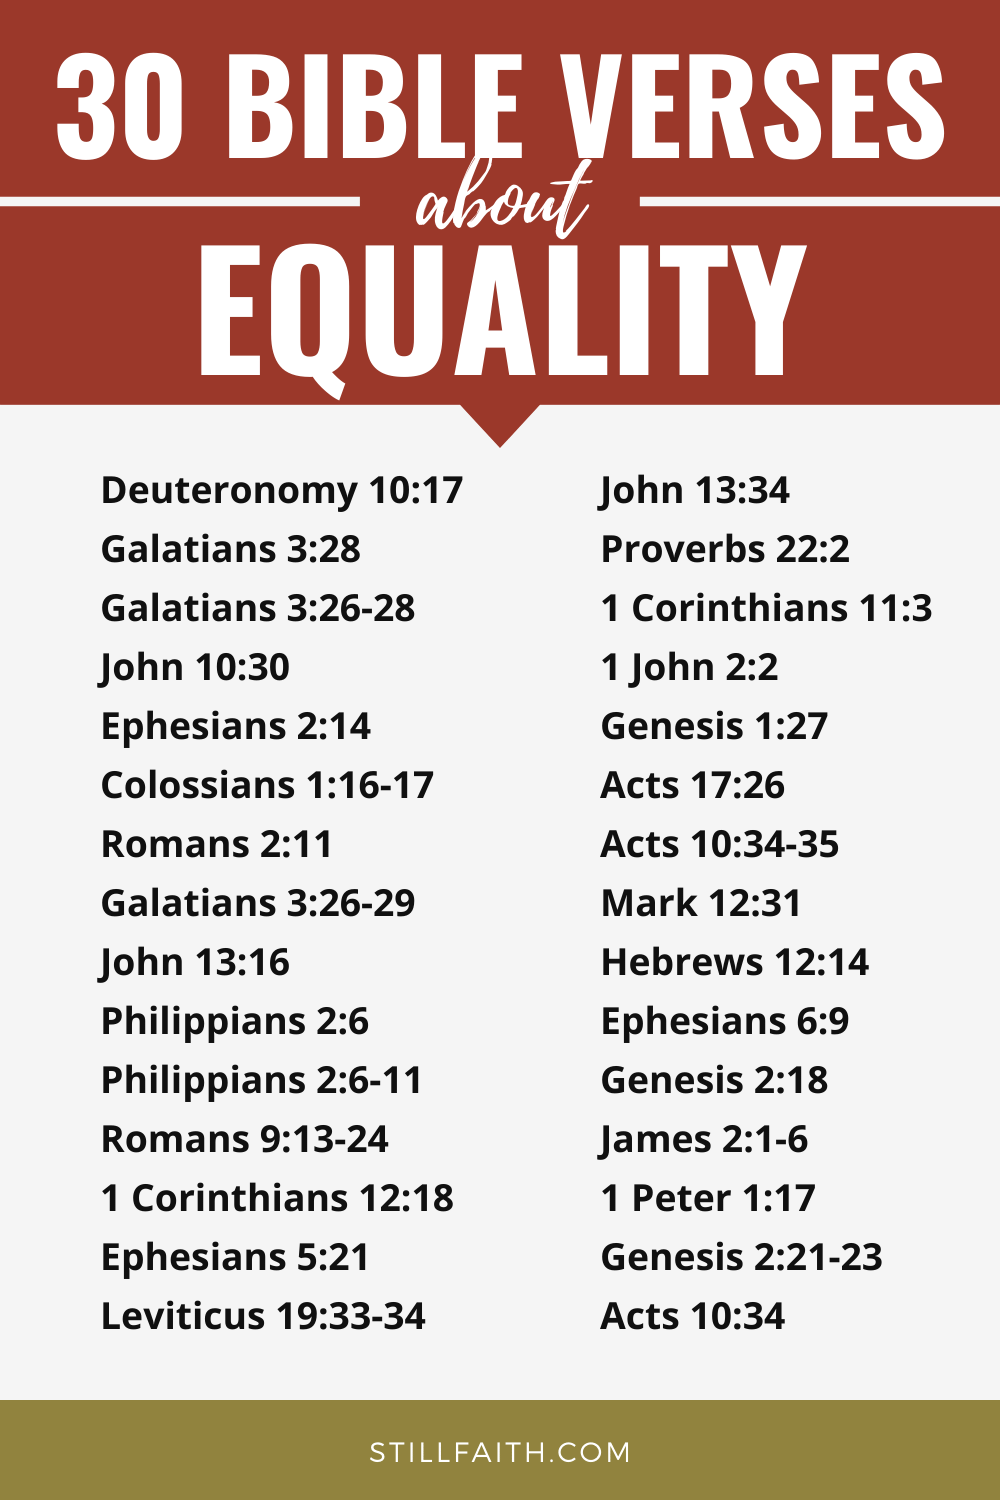 97 Bible Verses about Equality